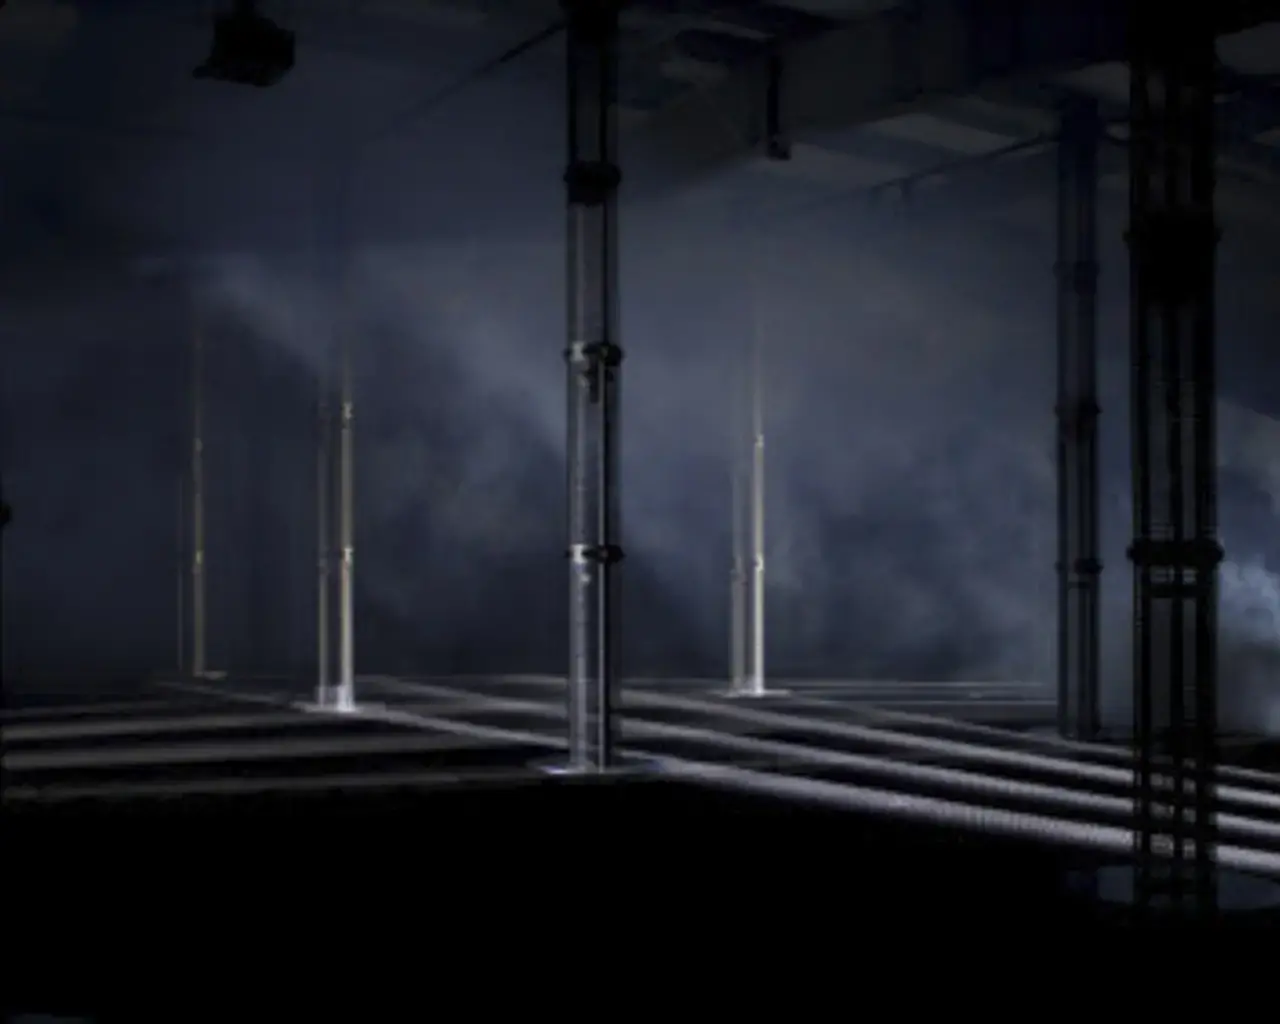 A dark room with side-lighting which casts shadows across a series of pillars that are part of a spatial sound system.